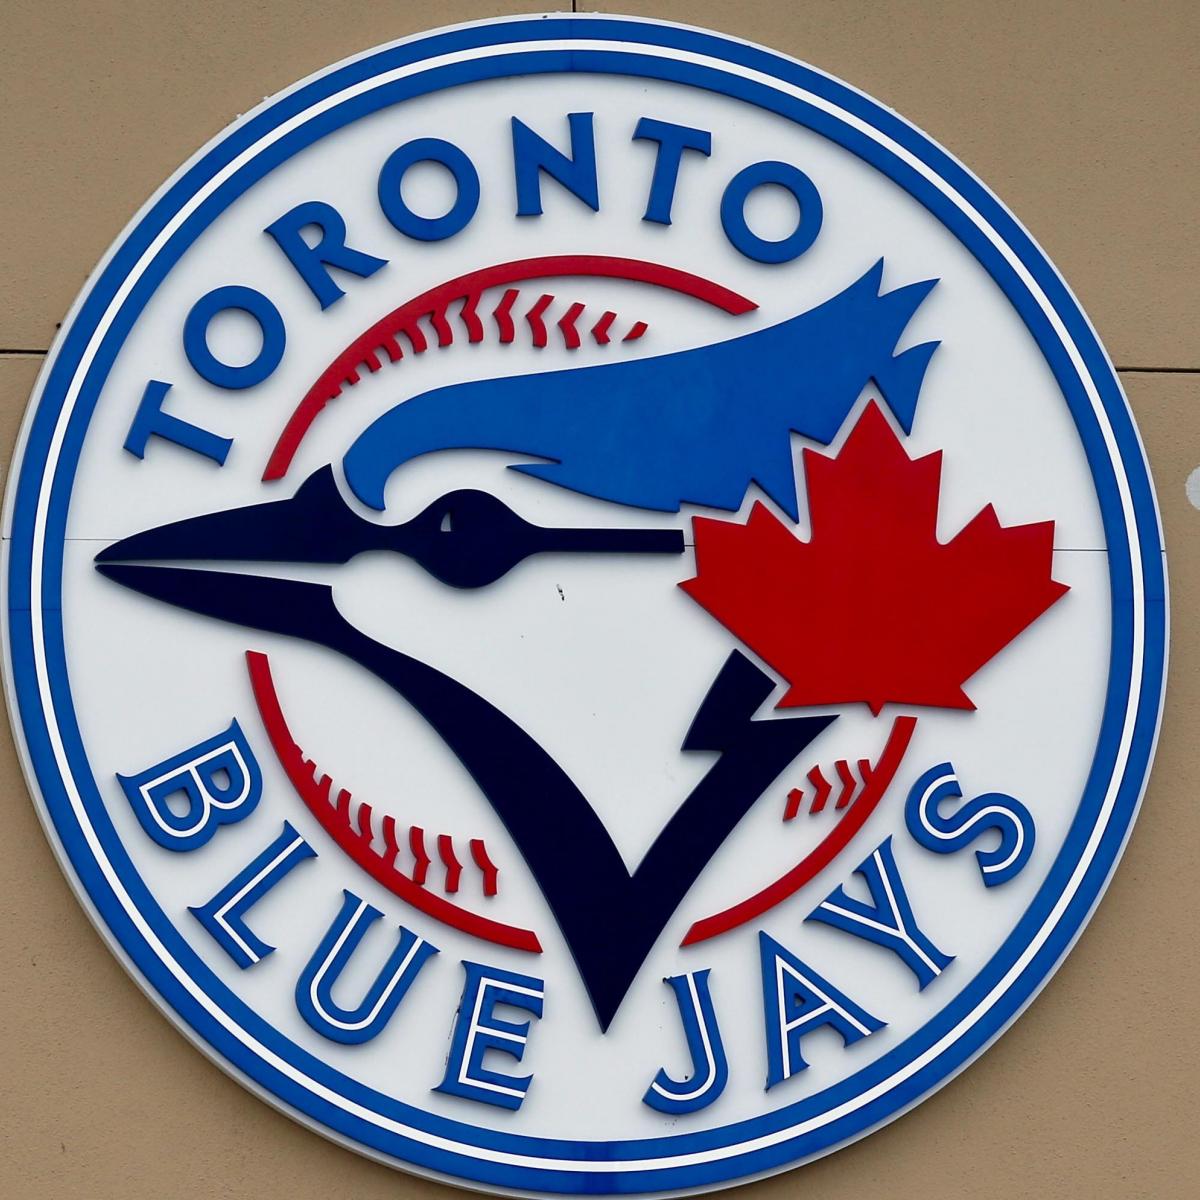 Gone Too Soon: The 2003 Blue Jays